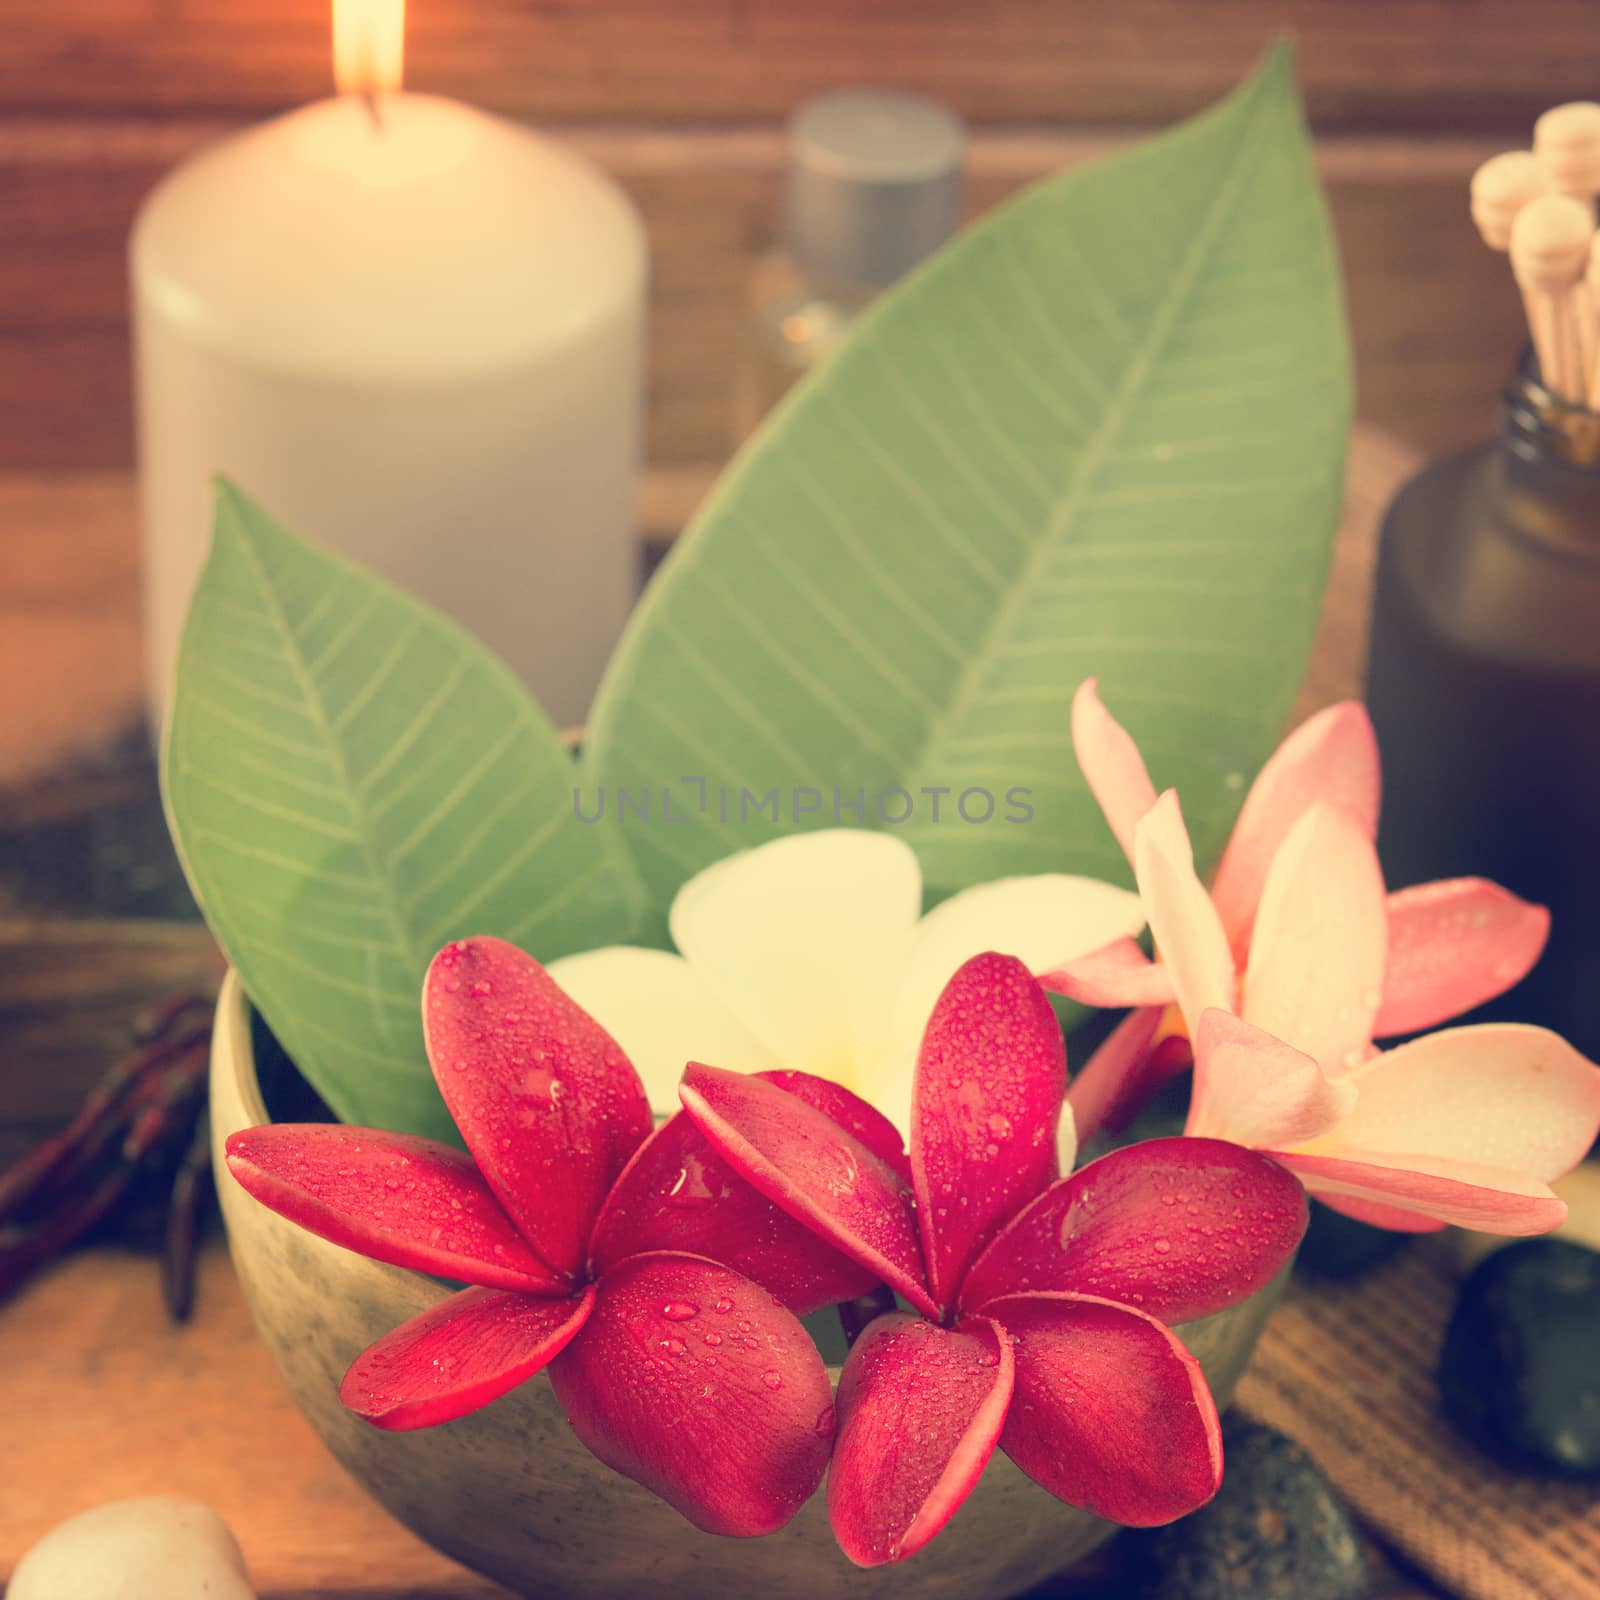 Tropical spa with Frangipani flowers in retro style. Low lighting, suitable for spa related theme.